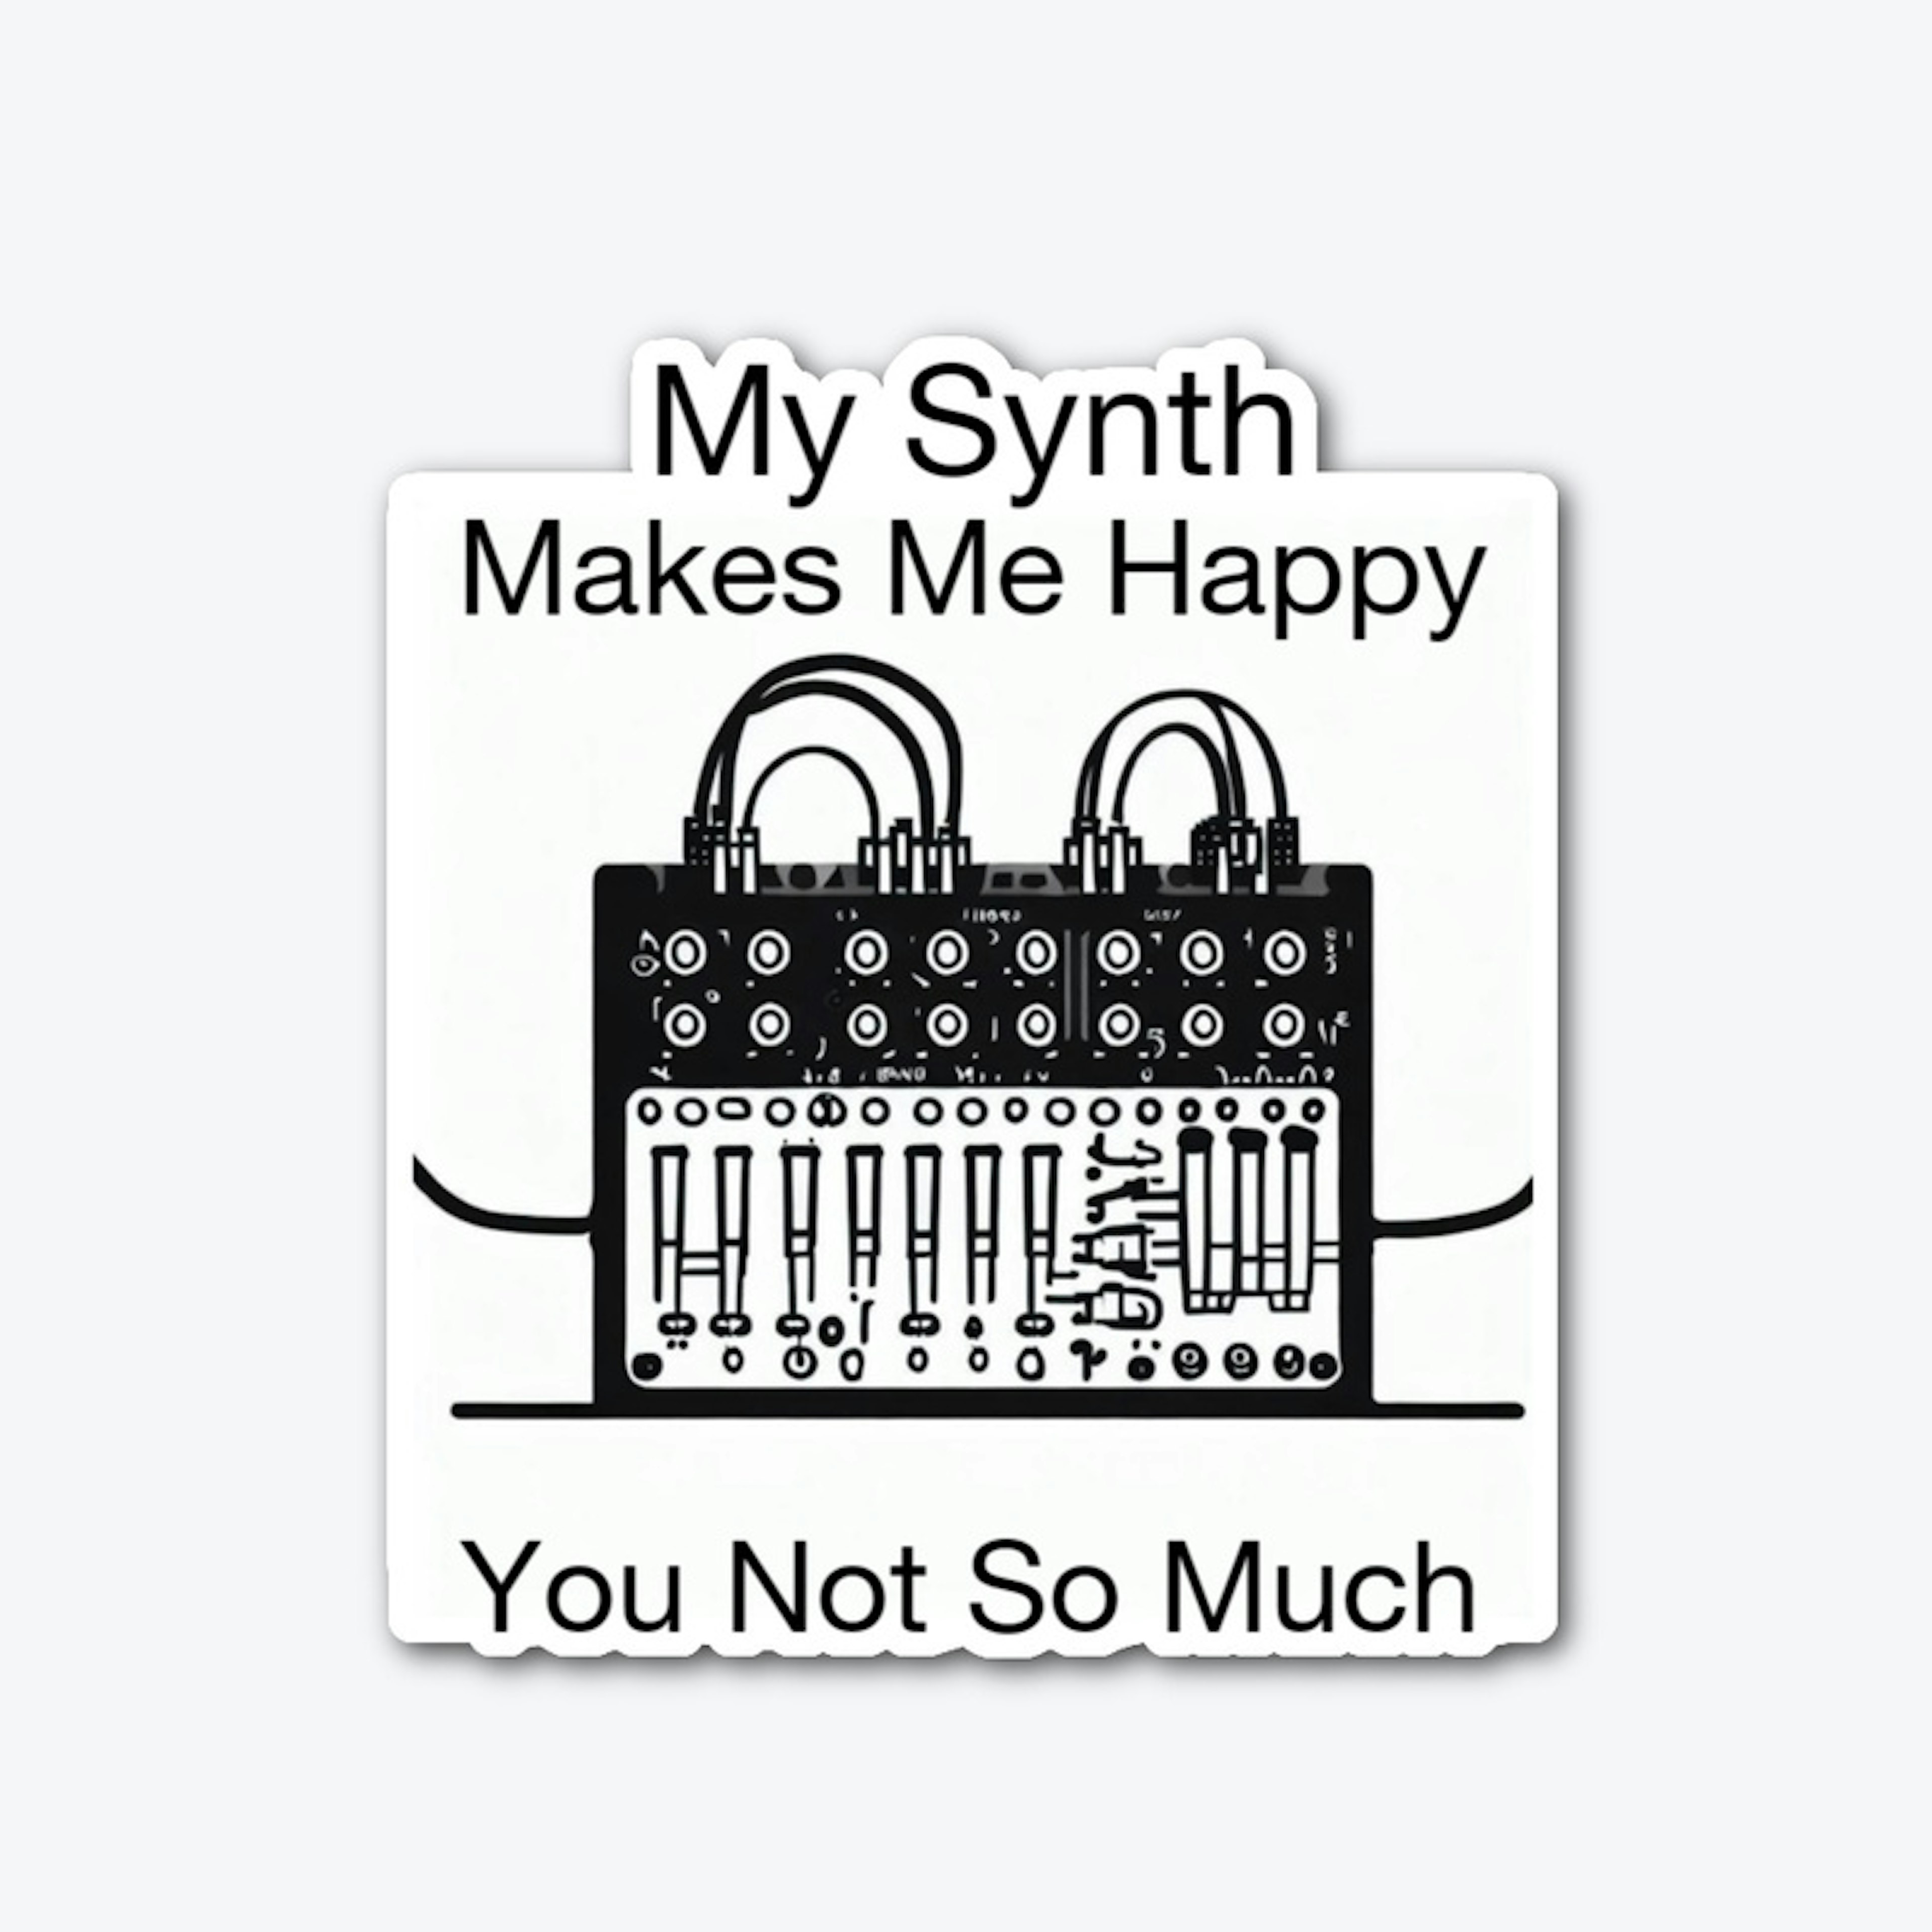 My Synth Makes Me Happy